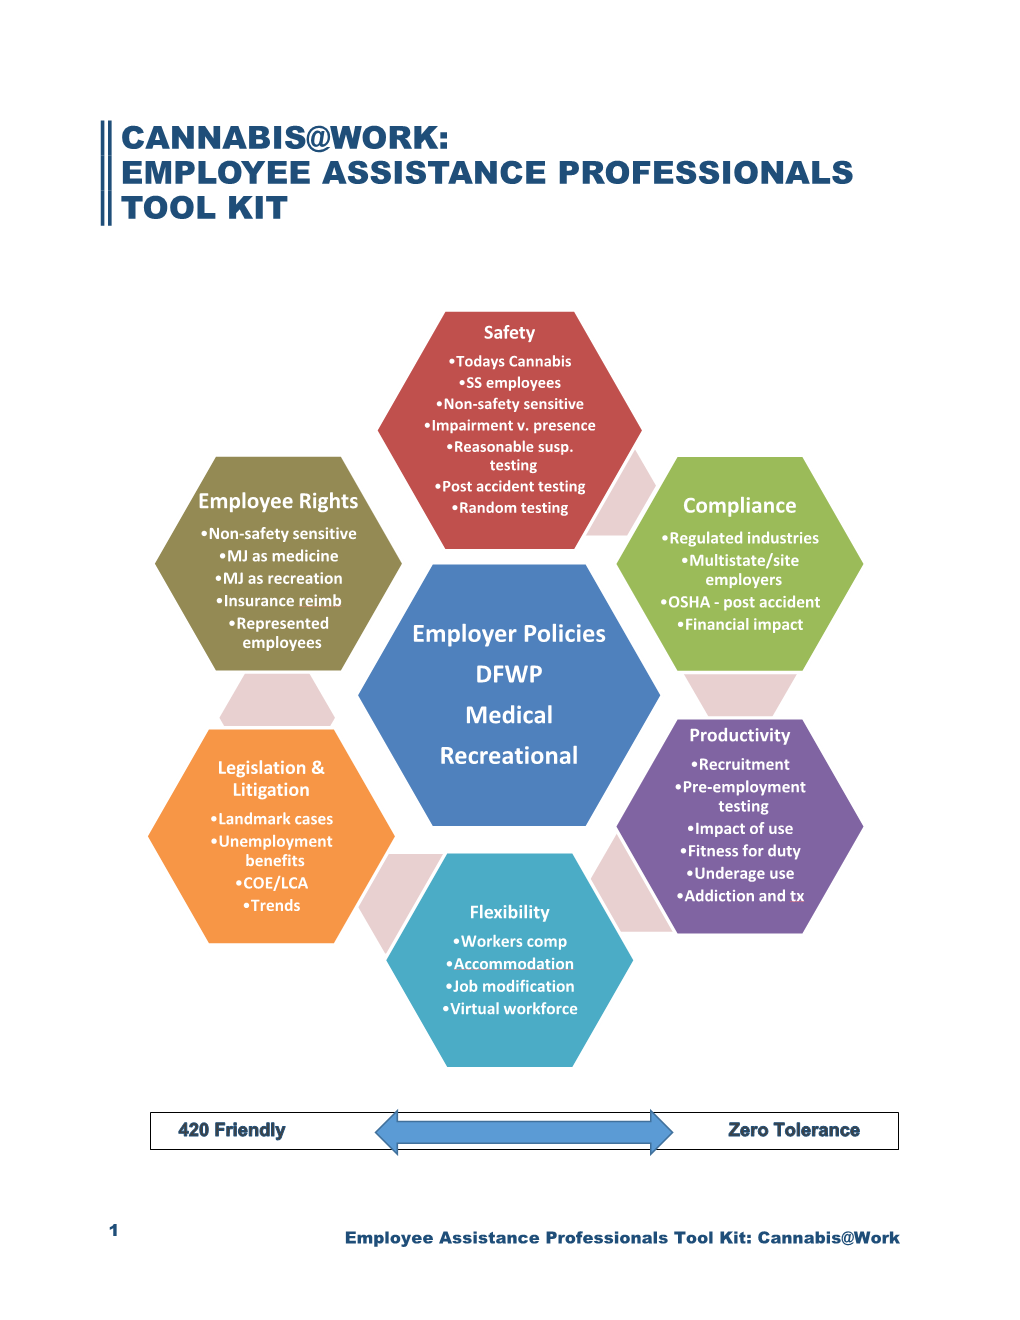 Employee Assistance Professionals Tool Kit